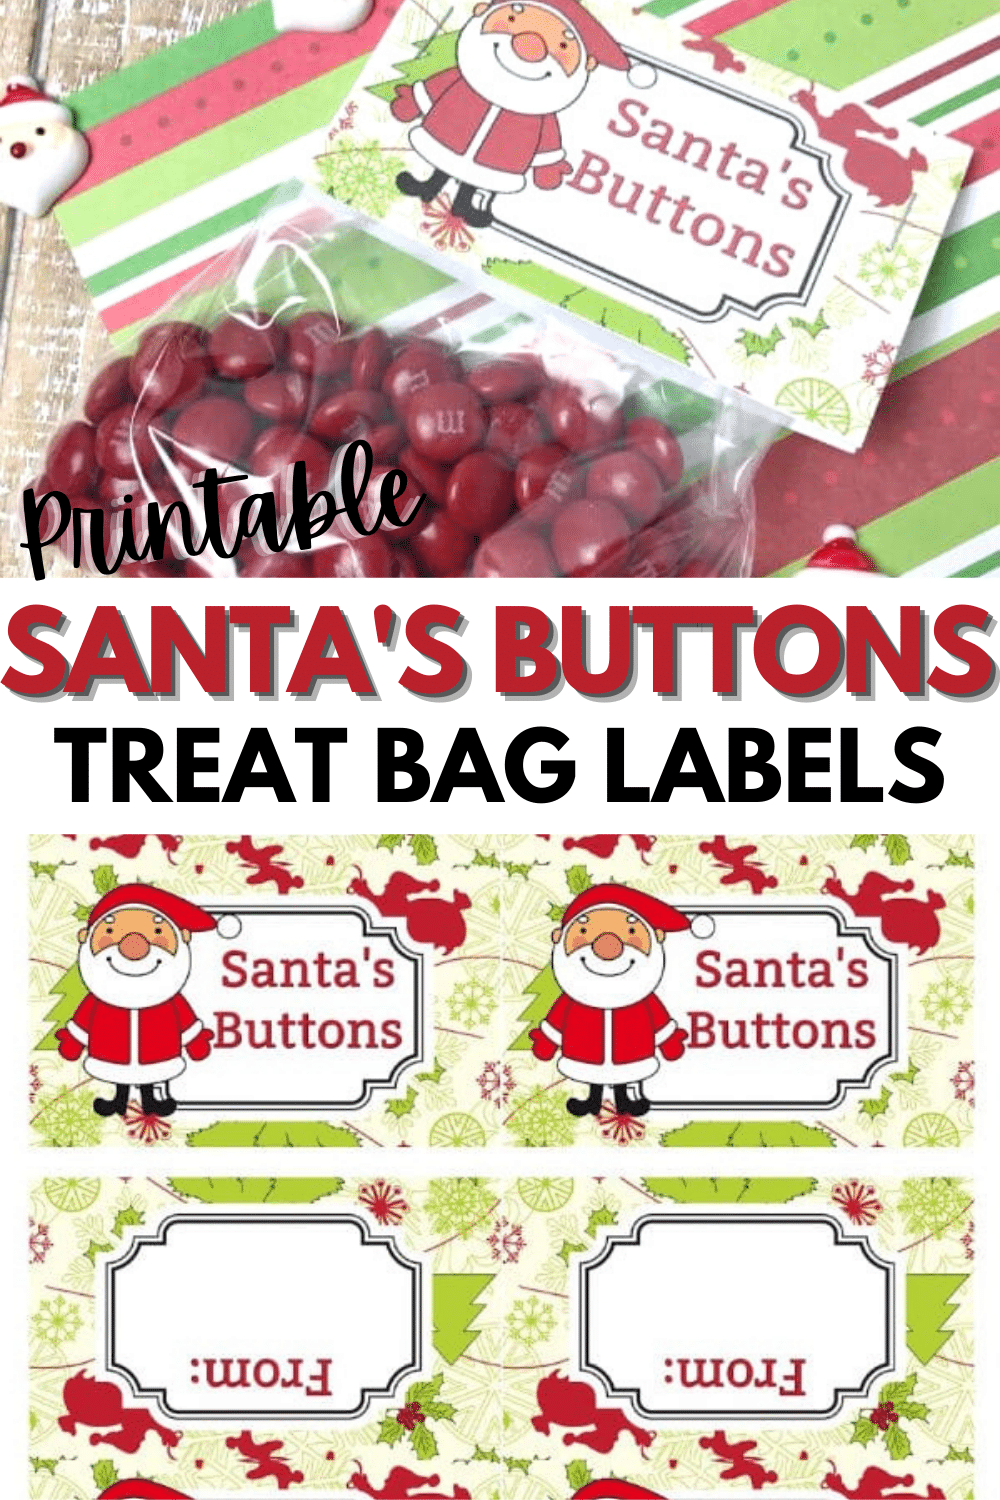 top image is a Santa’s Buttons Treat Bag, bottom image is printable Santa’s Buttons Treat Bag labels